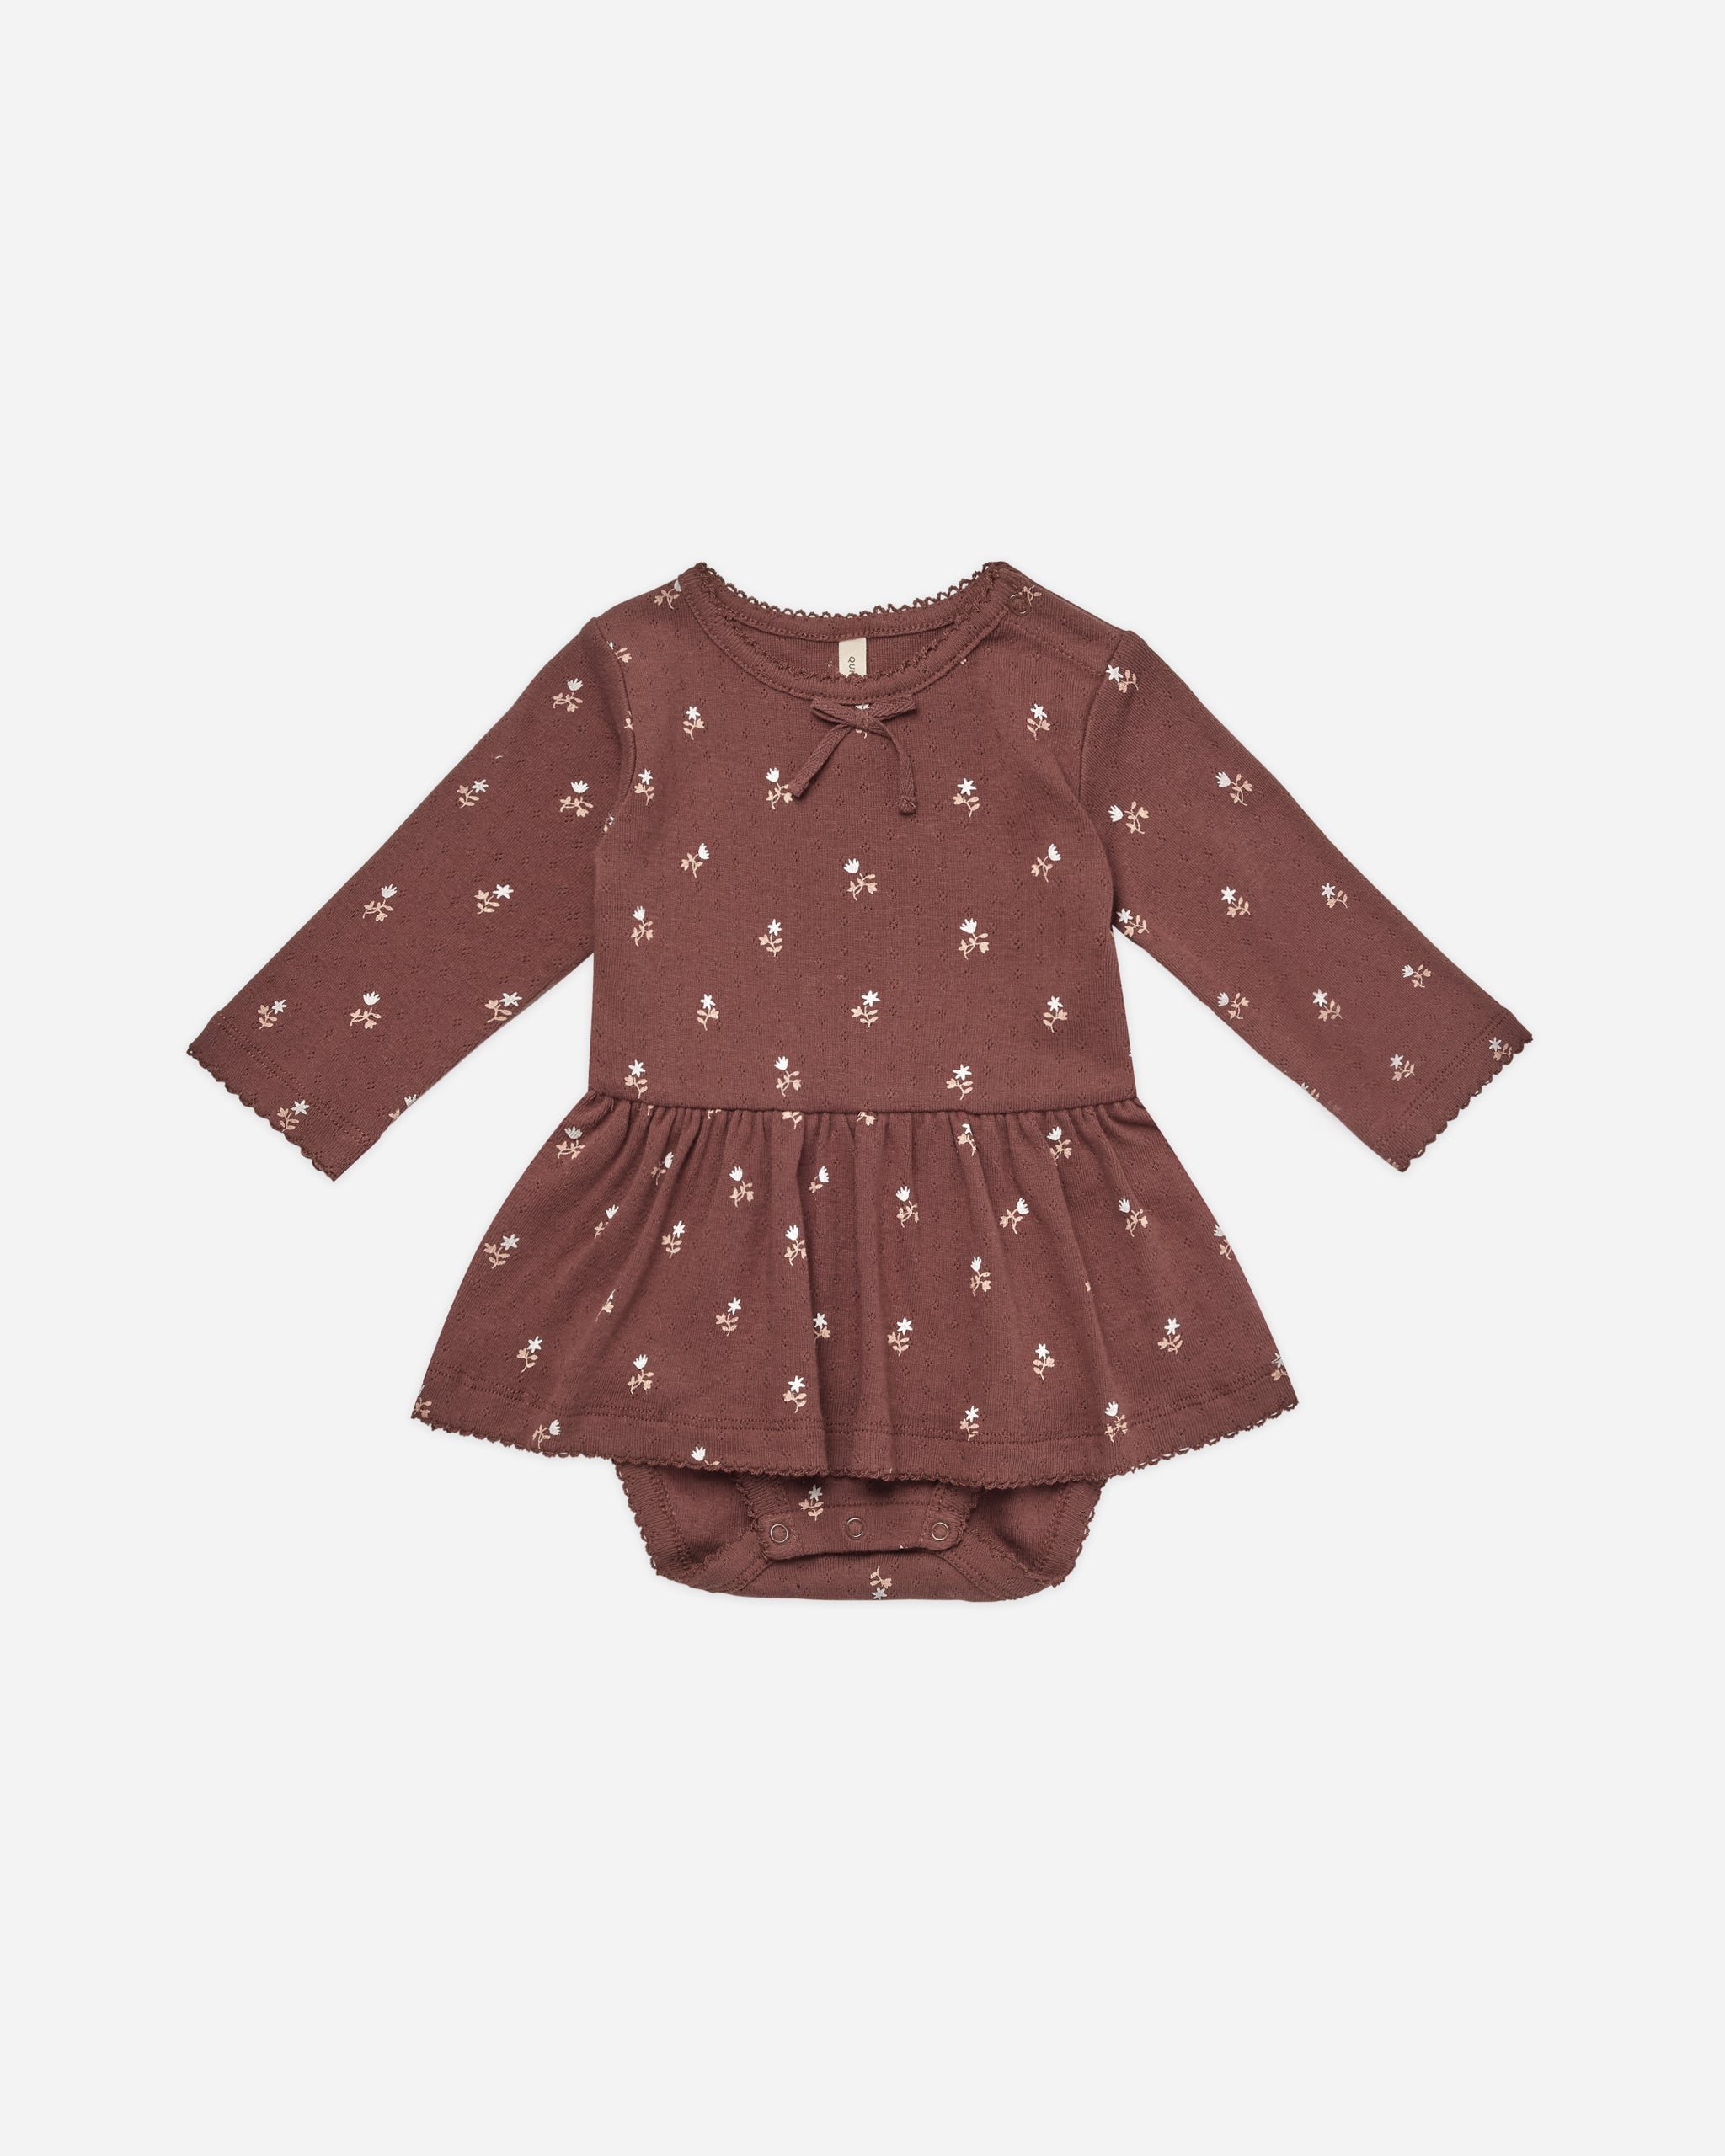 Pointelle Skirted Bodysuit || Plum Fleur - Rylee + Cru | Kids Clothes | Trendy Baby Clothes | Modern Infant Outfits |